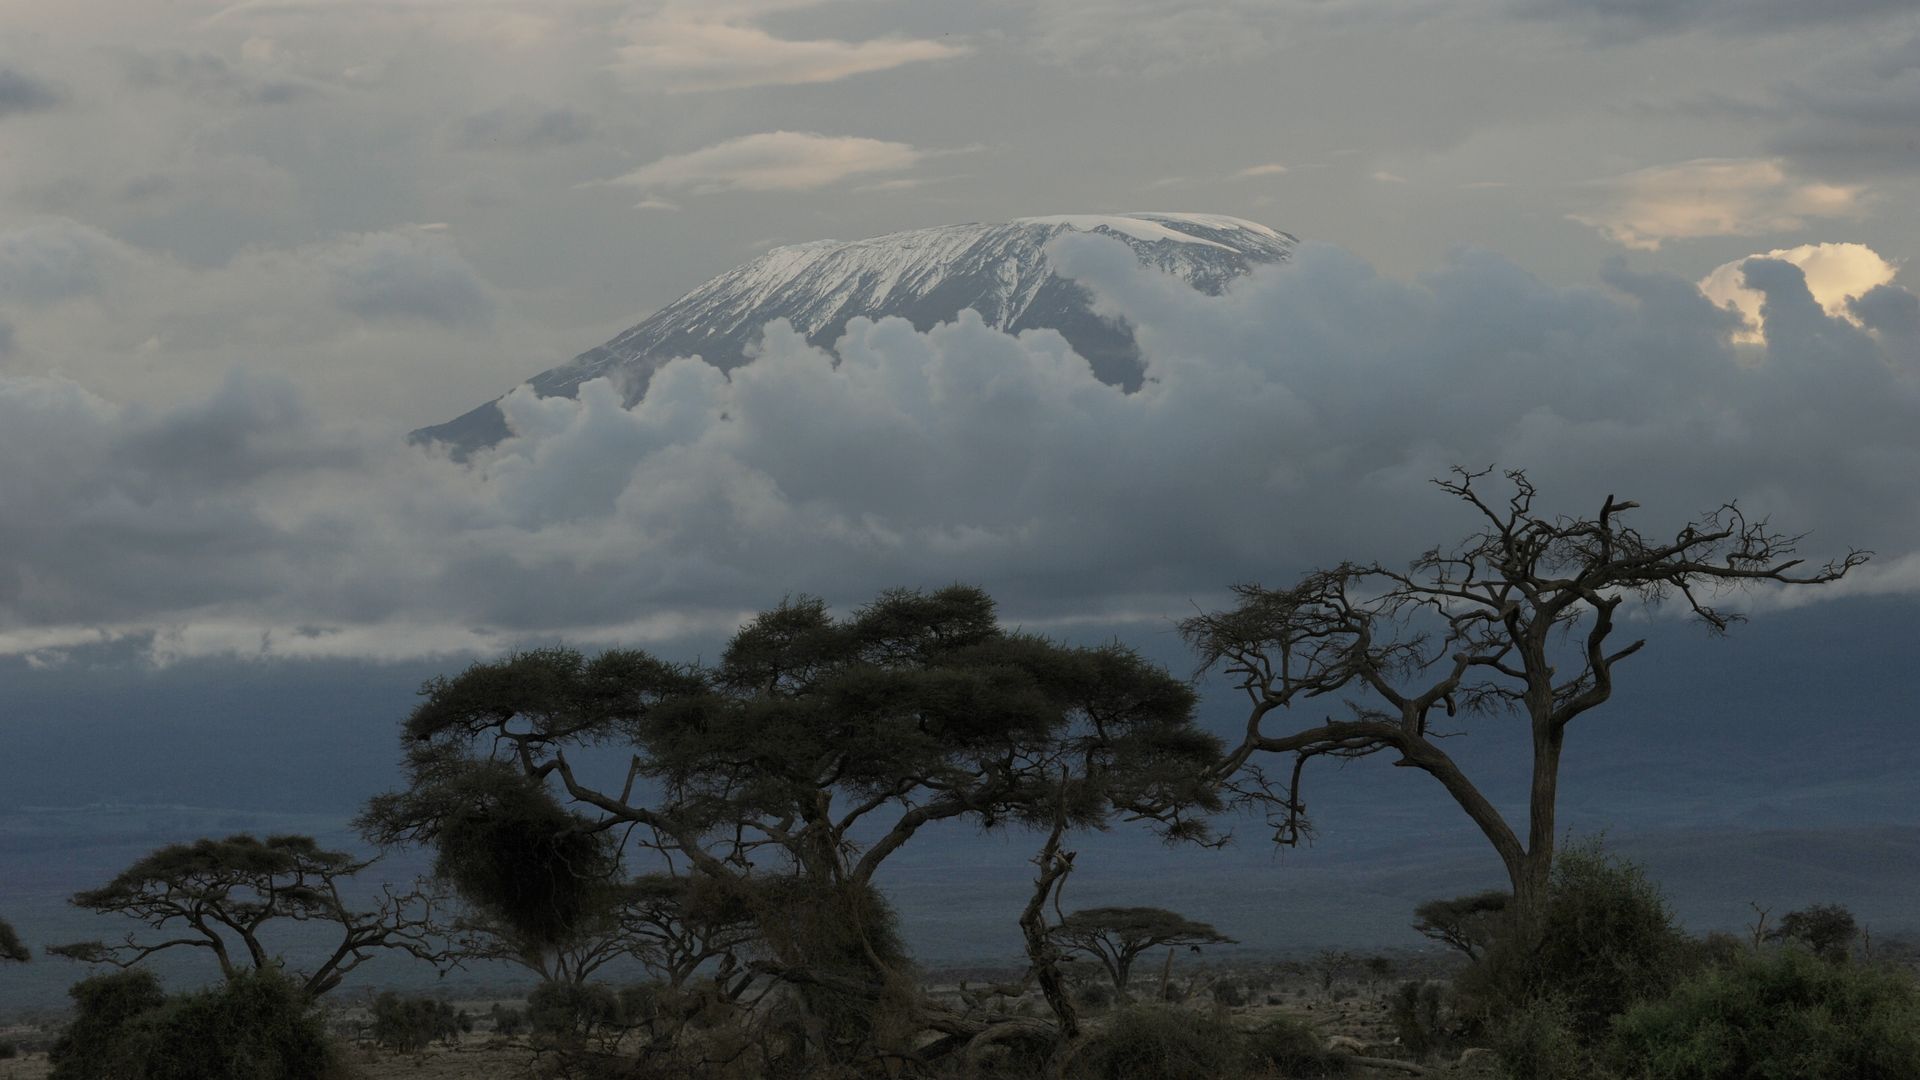 Mount Kilimanjaro in Tanzania partially covered by clouds in December 2009.